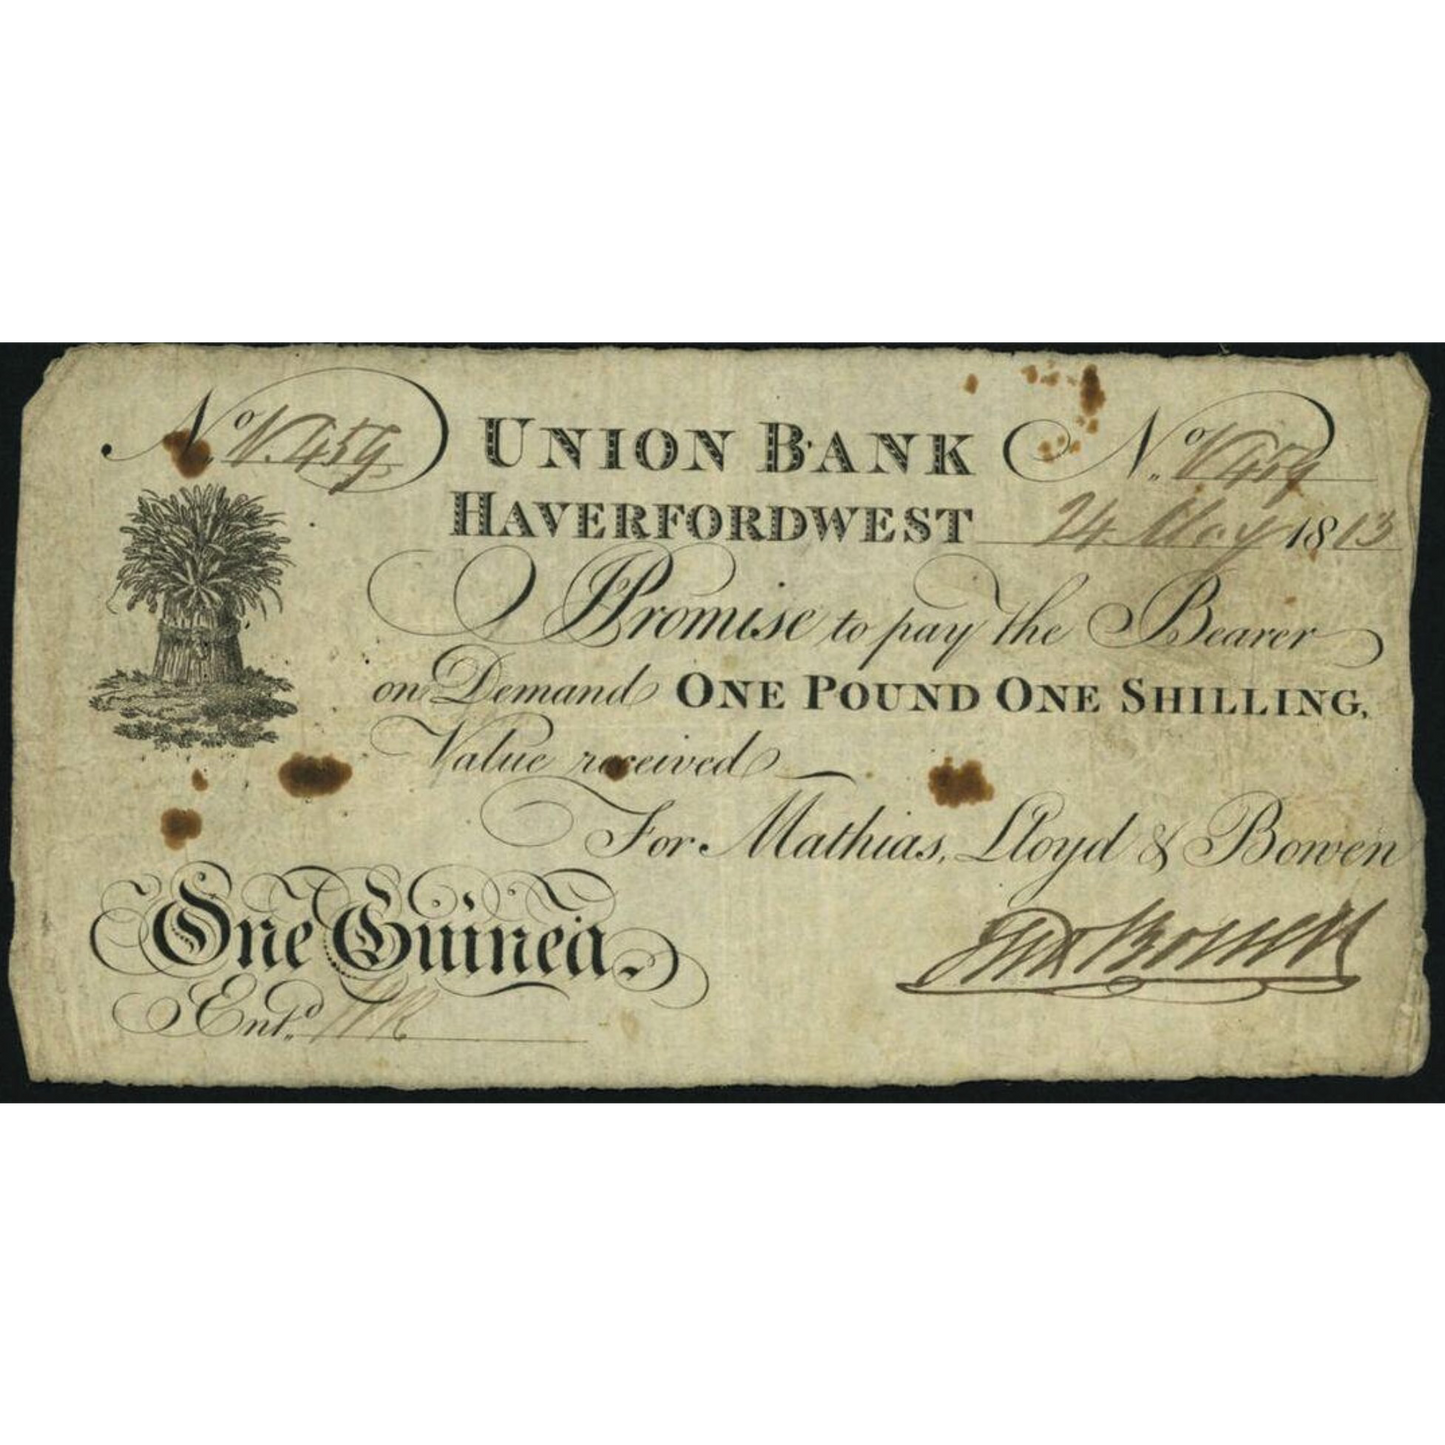 Union Bank Haverfordwest 1813 1 guinea banknote F Outing 913a